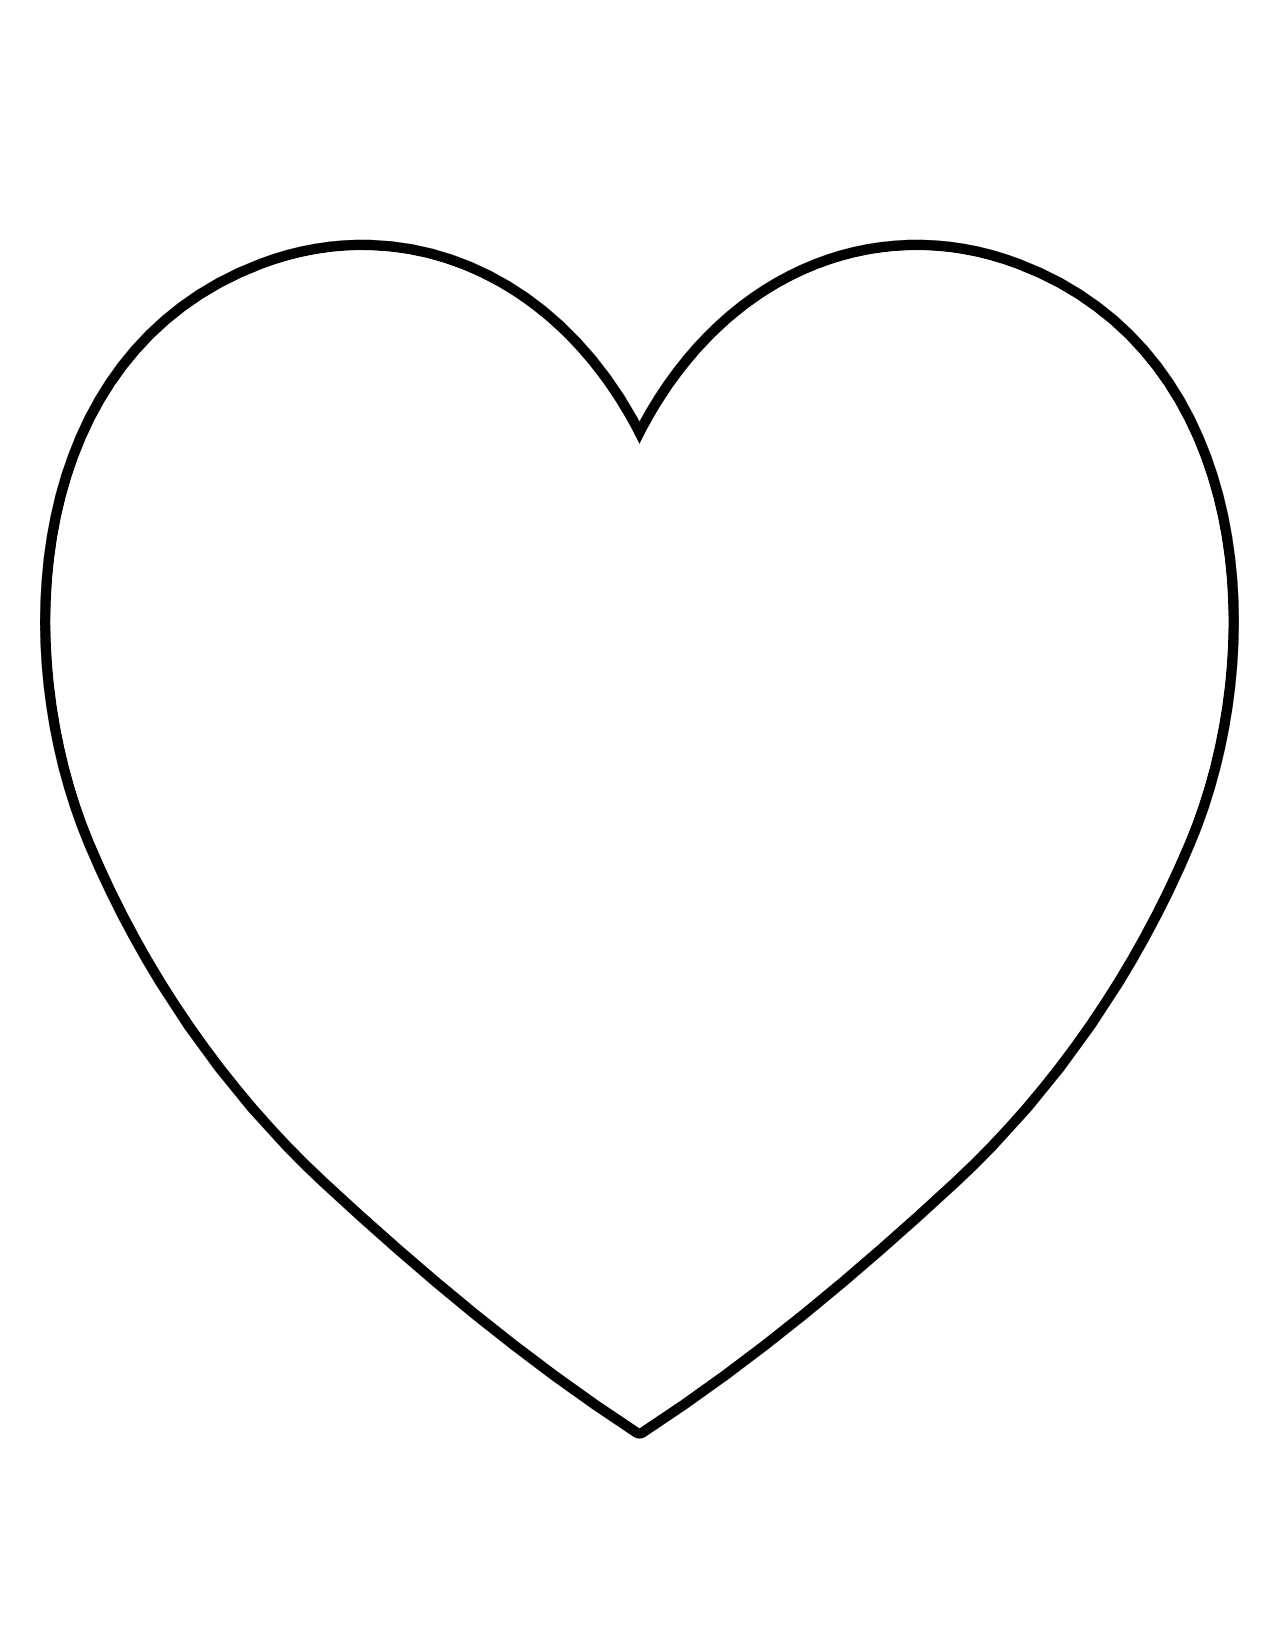 Best Photos of Basic Heart Stencil - Love Heart Outline, Free ...